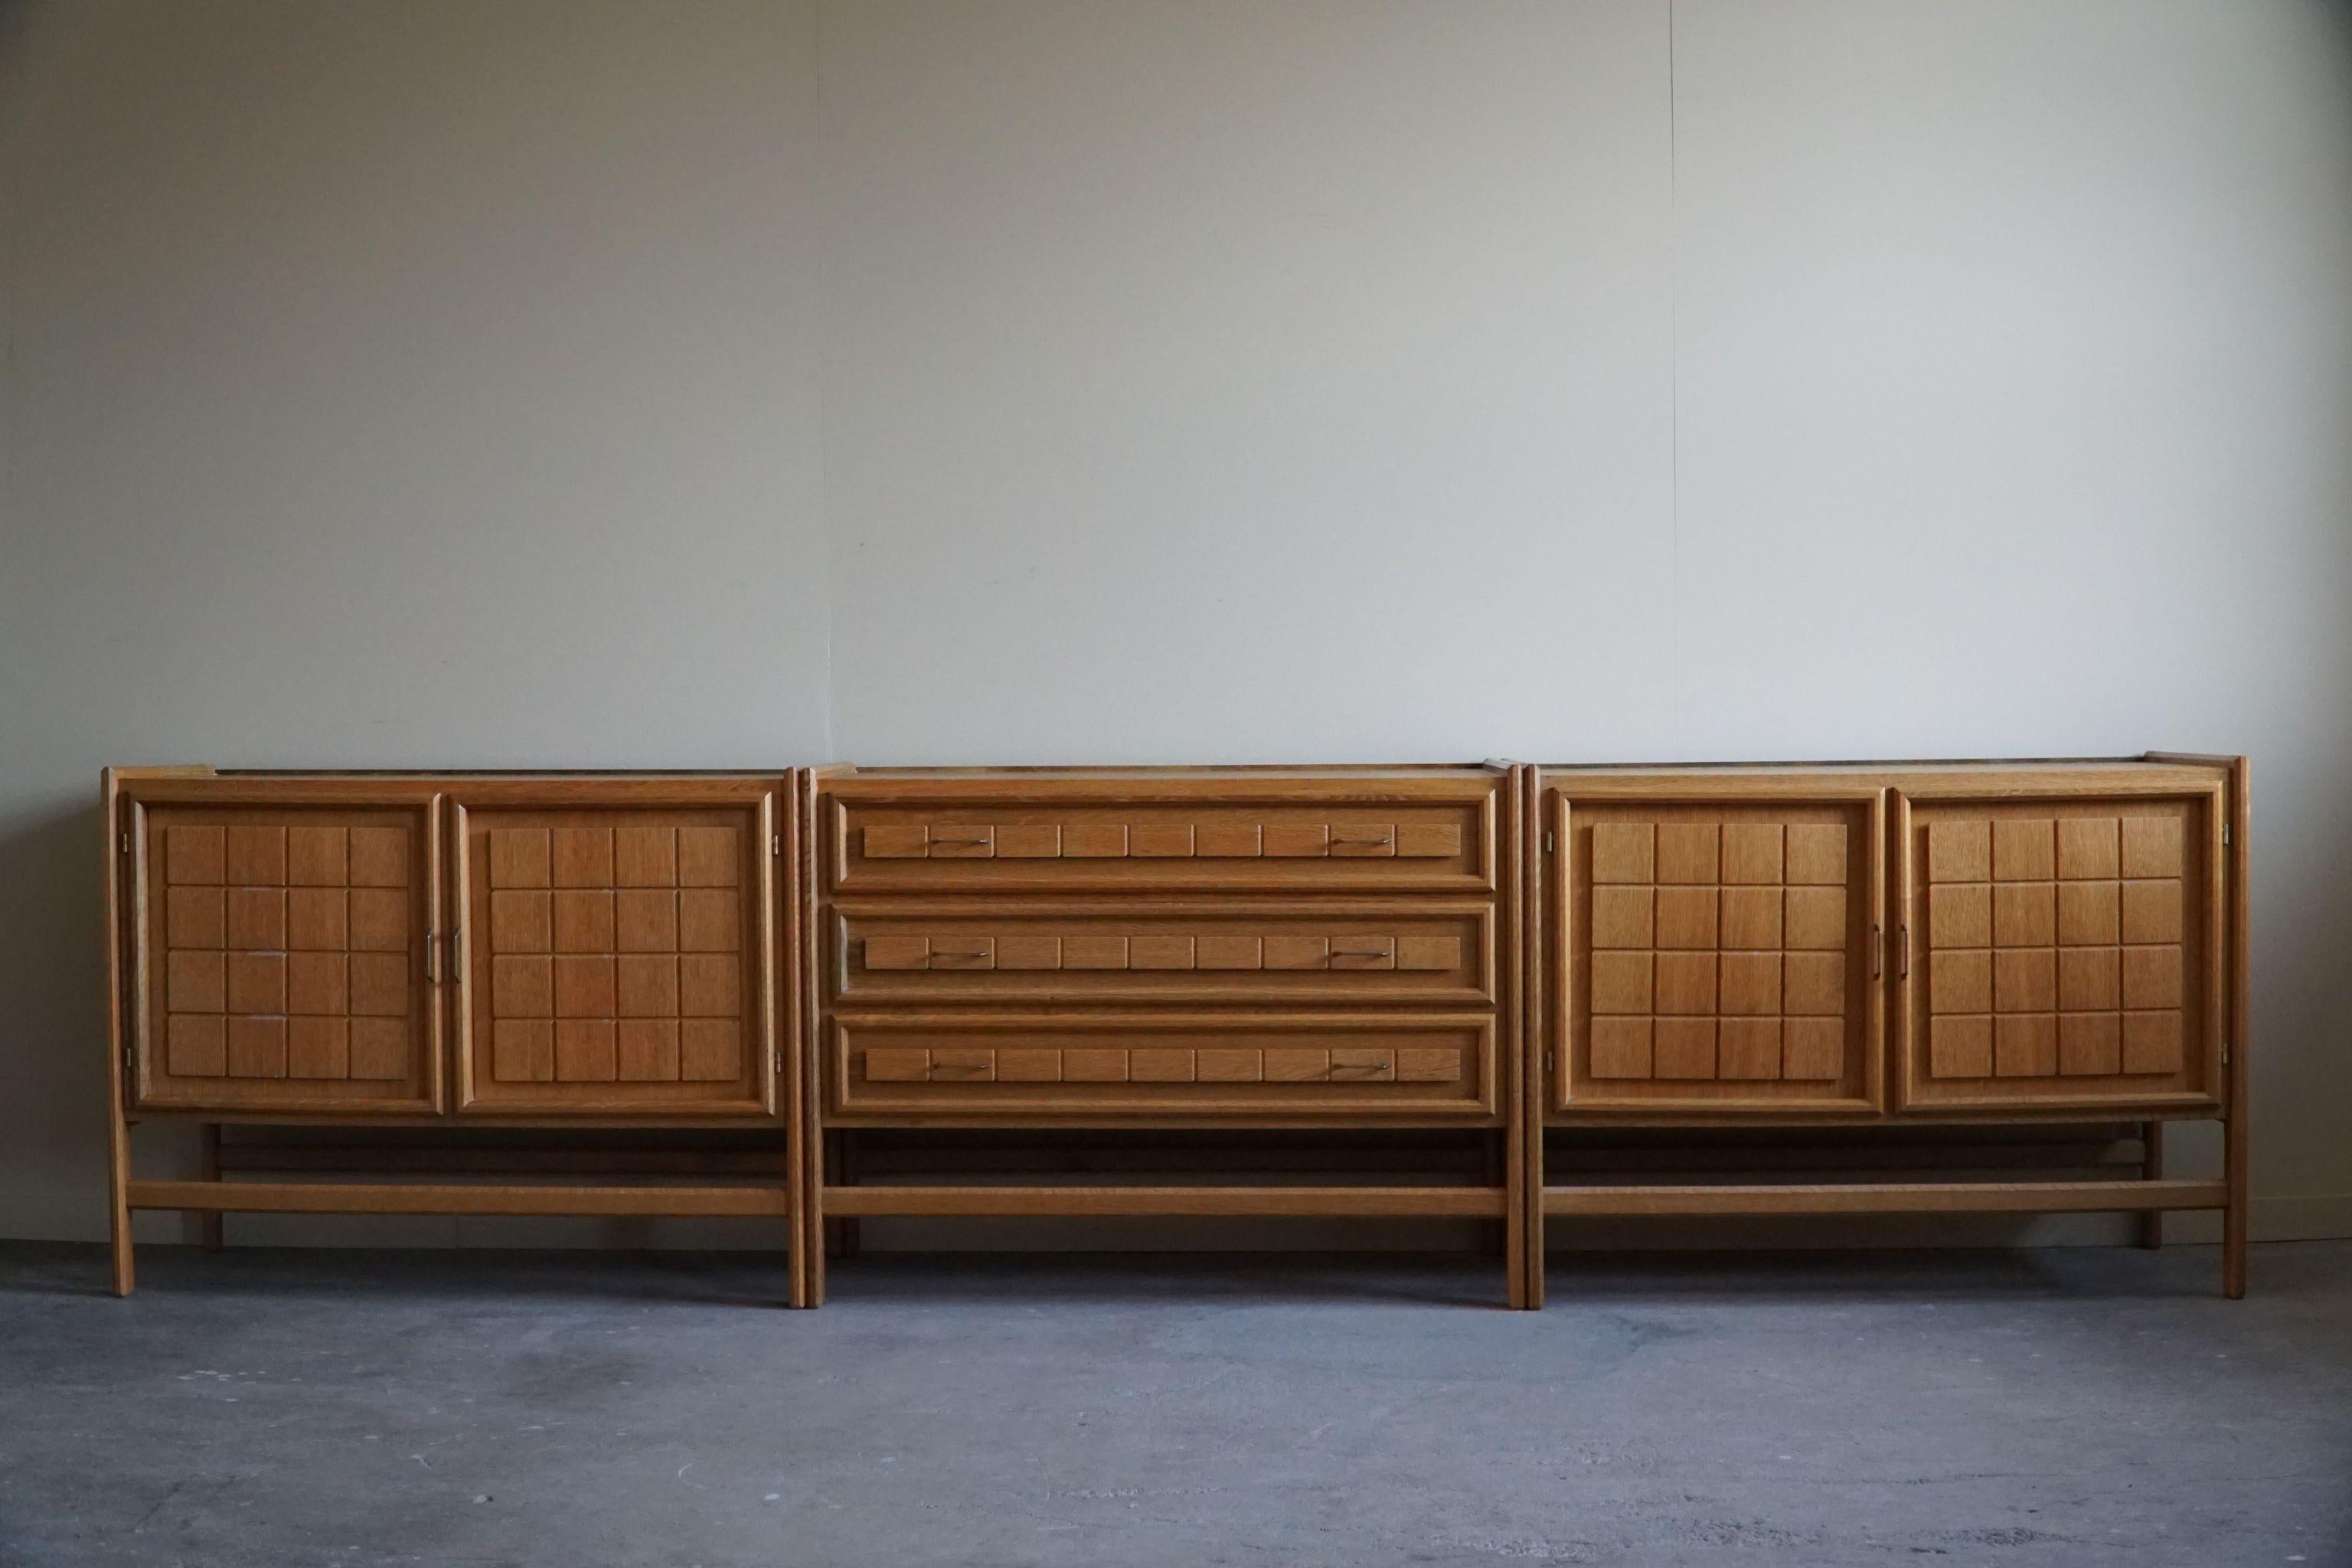 This fascinating set contains two cabinets and one chest of drawers in solid oak. Great patina and a fine carved front design. Made by a Danish cabinetmaker in the 1960s. 
Can be used as one unit or three separate units. 

These intriguing brutalist